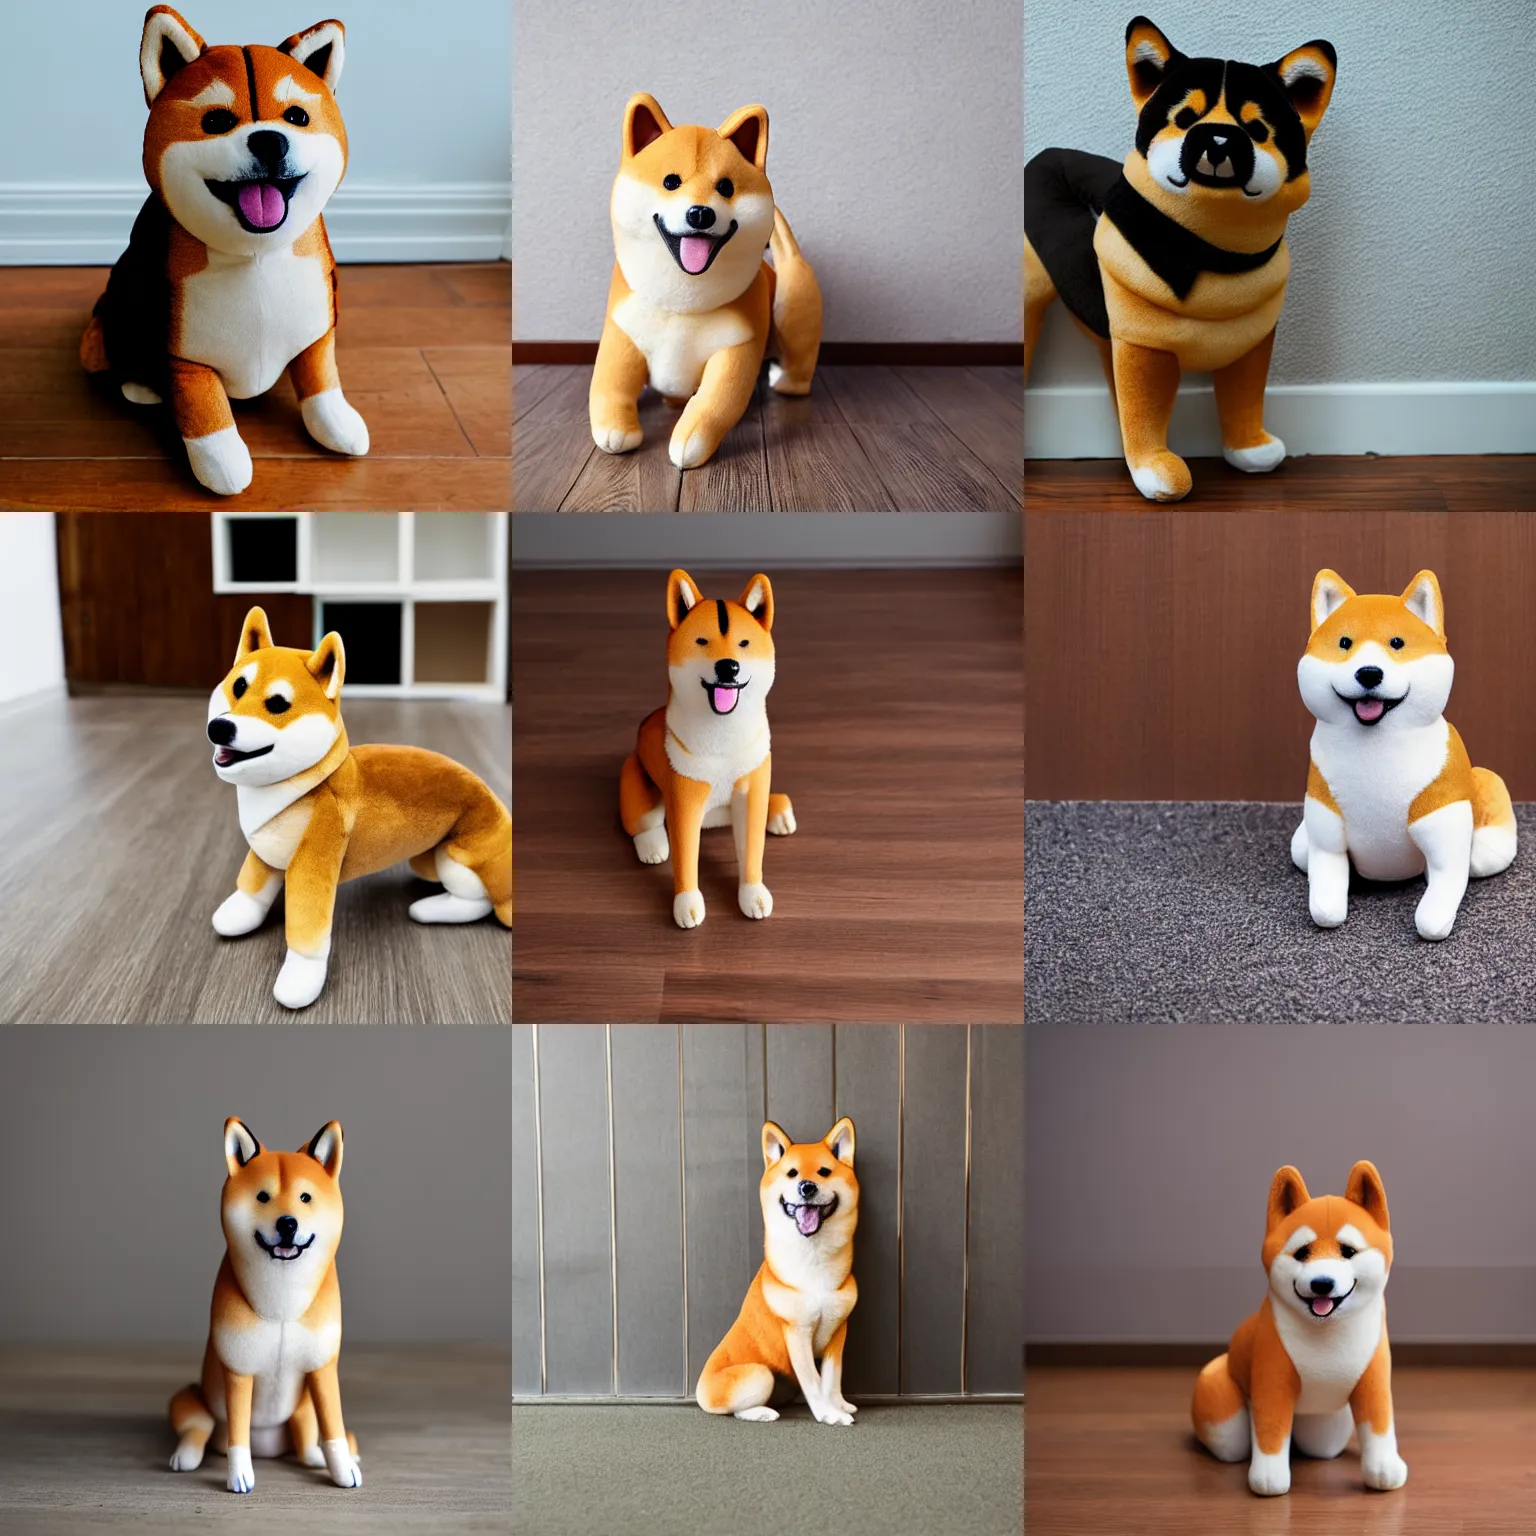 Prompt: a plush toy Shiba Inu dog sitting on a wooden floor against a white wall